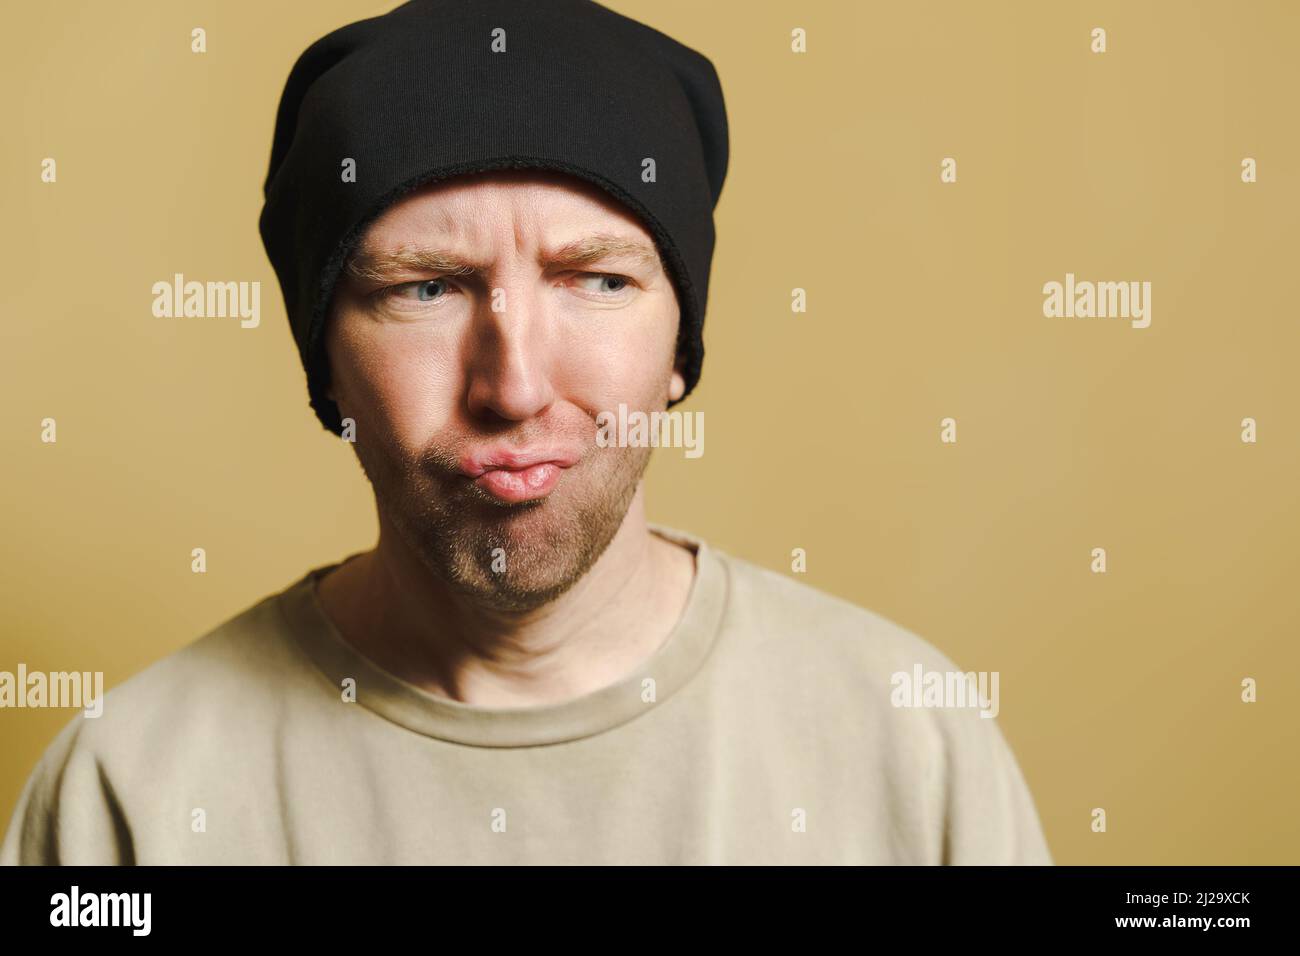 The man in the black hat looks with contempt. Portrait of a young man making faces. Stock Photo